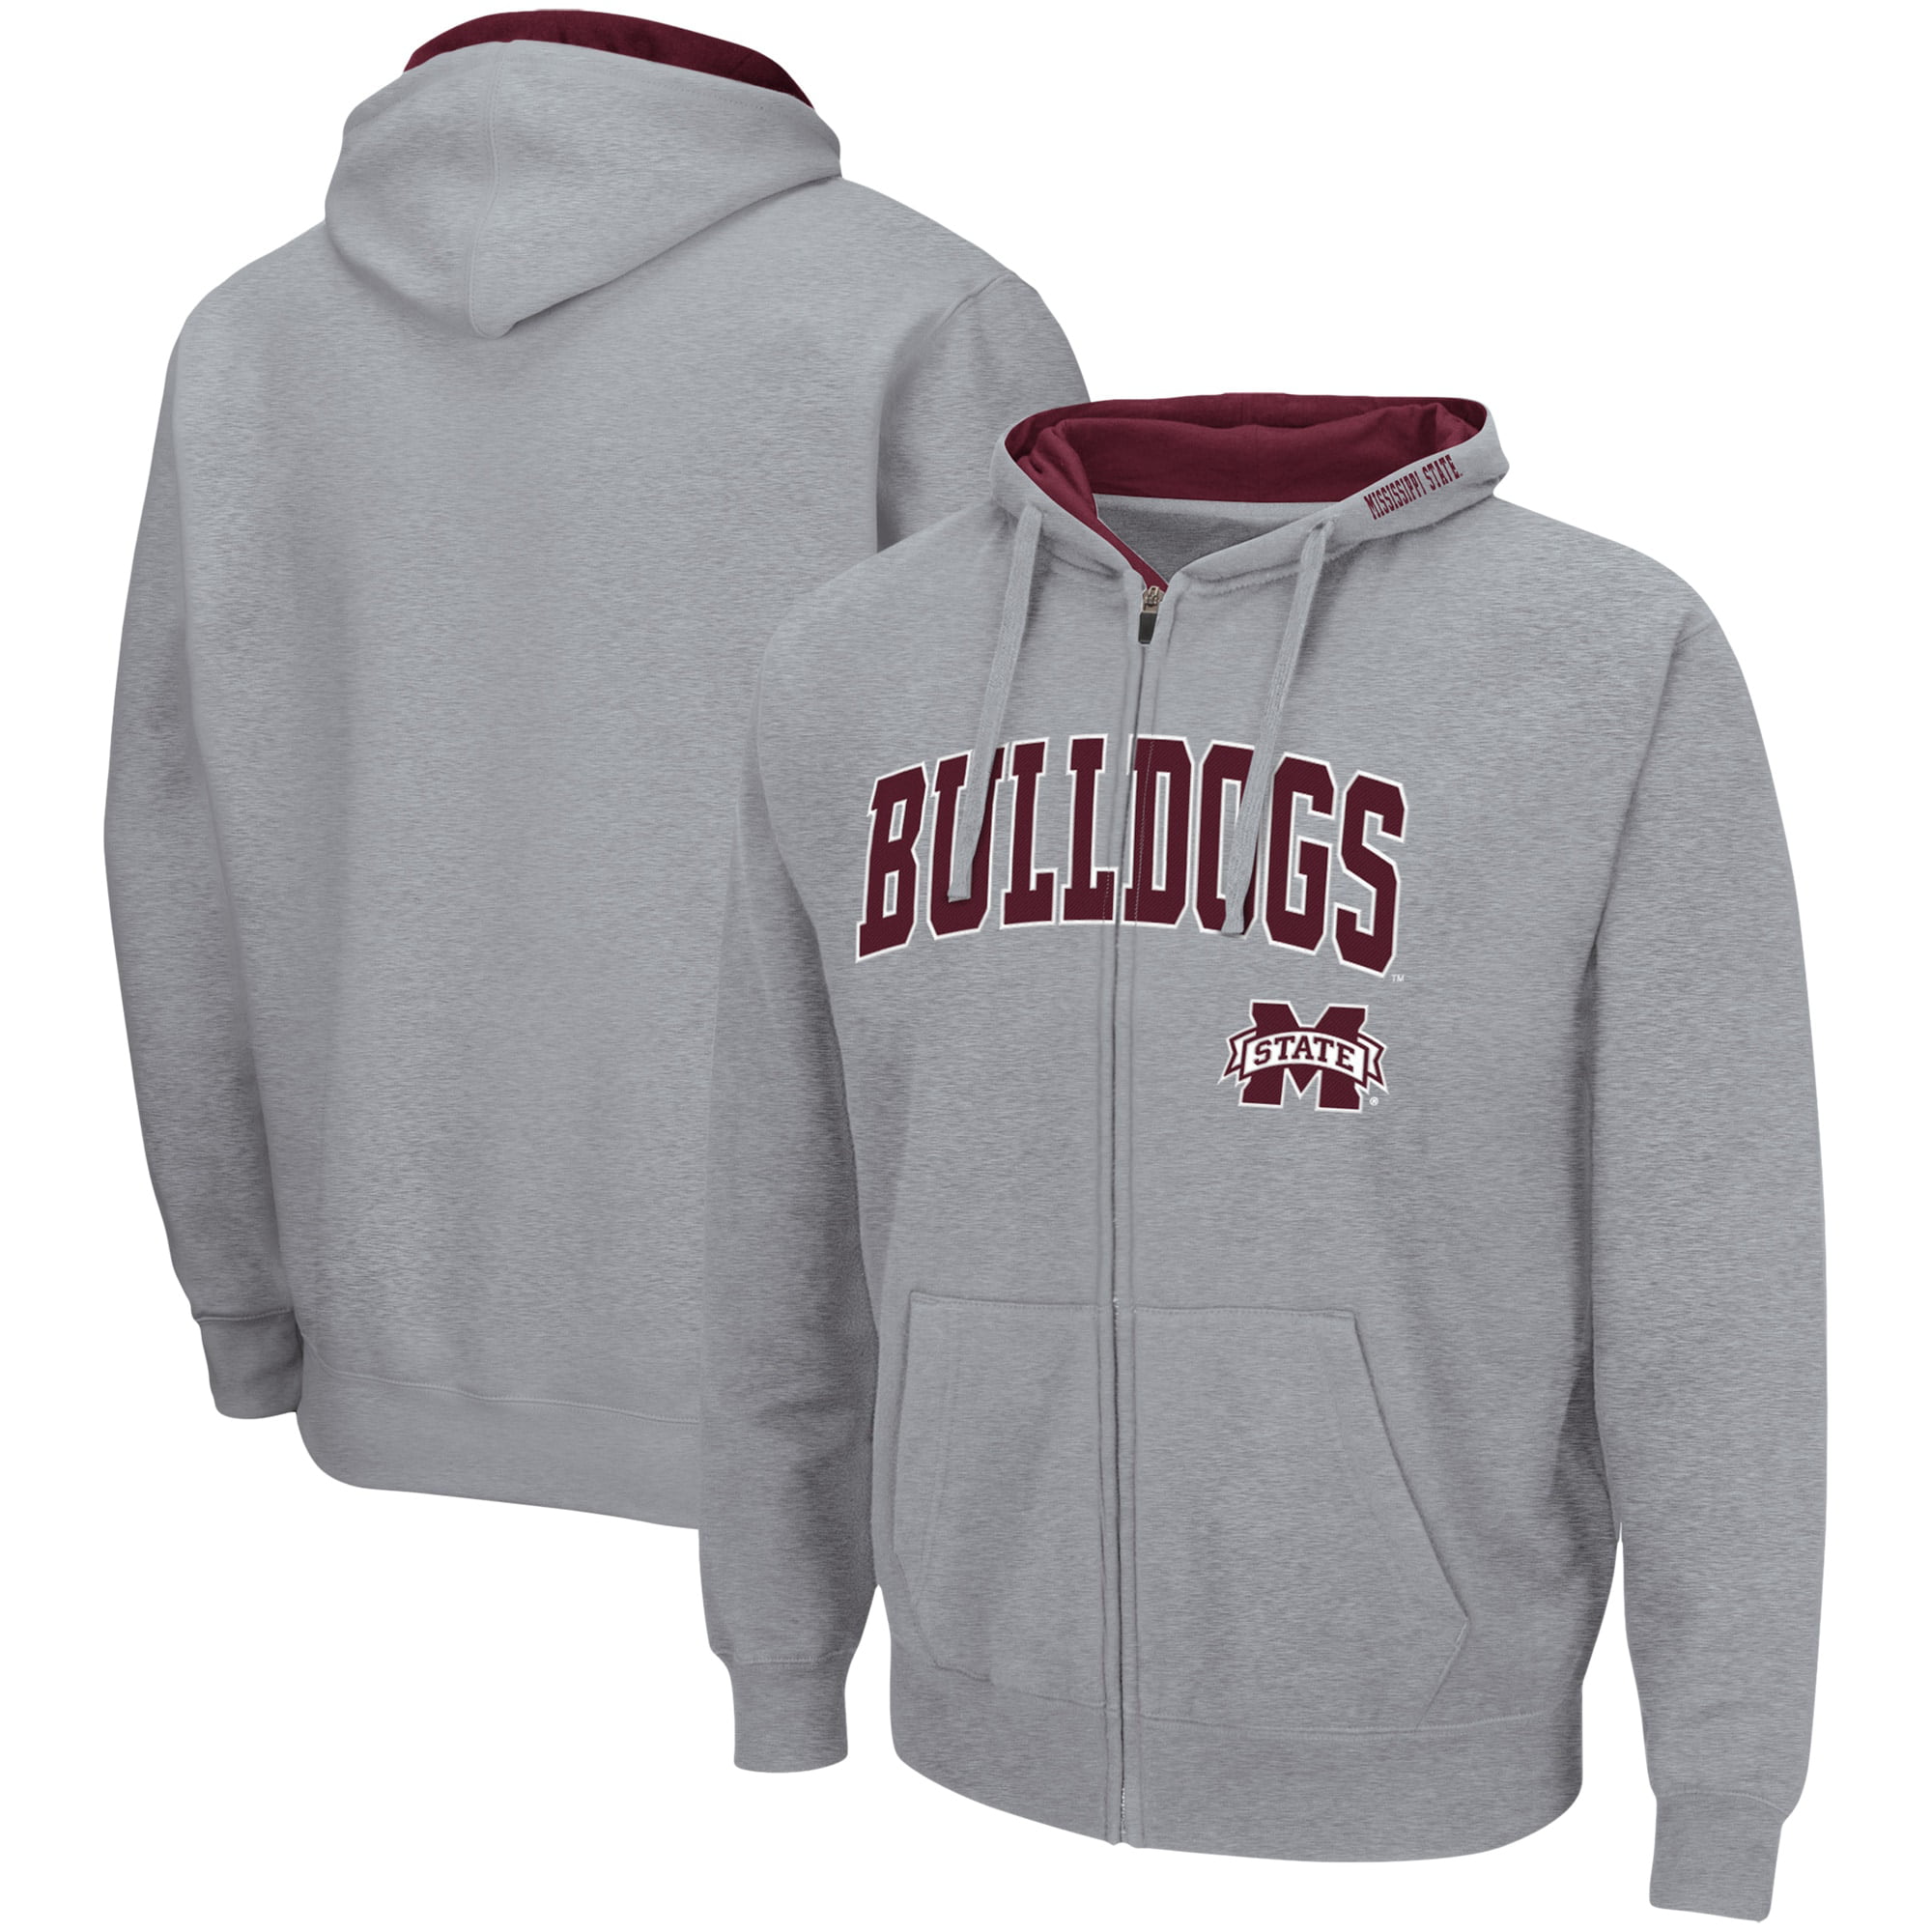 MISSOURI STATE BEARS KIDS TODDLERS GREY EMBROIDERED HOODED SWEATSHIRT NEW 